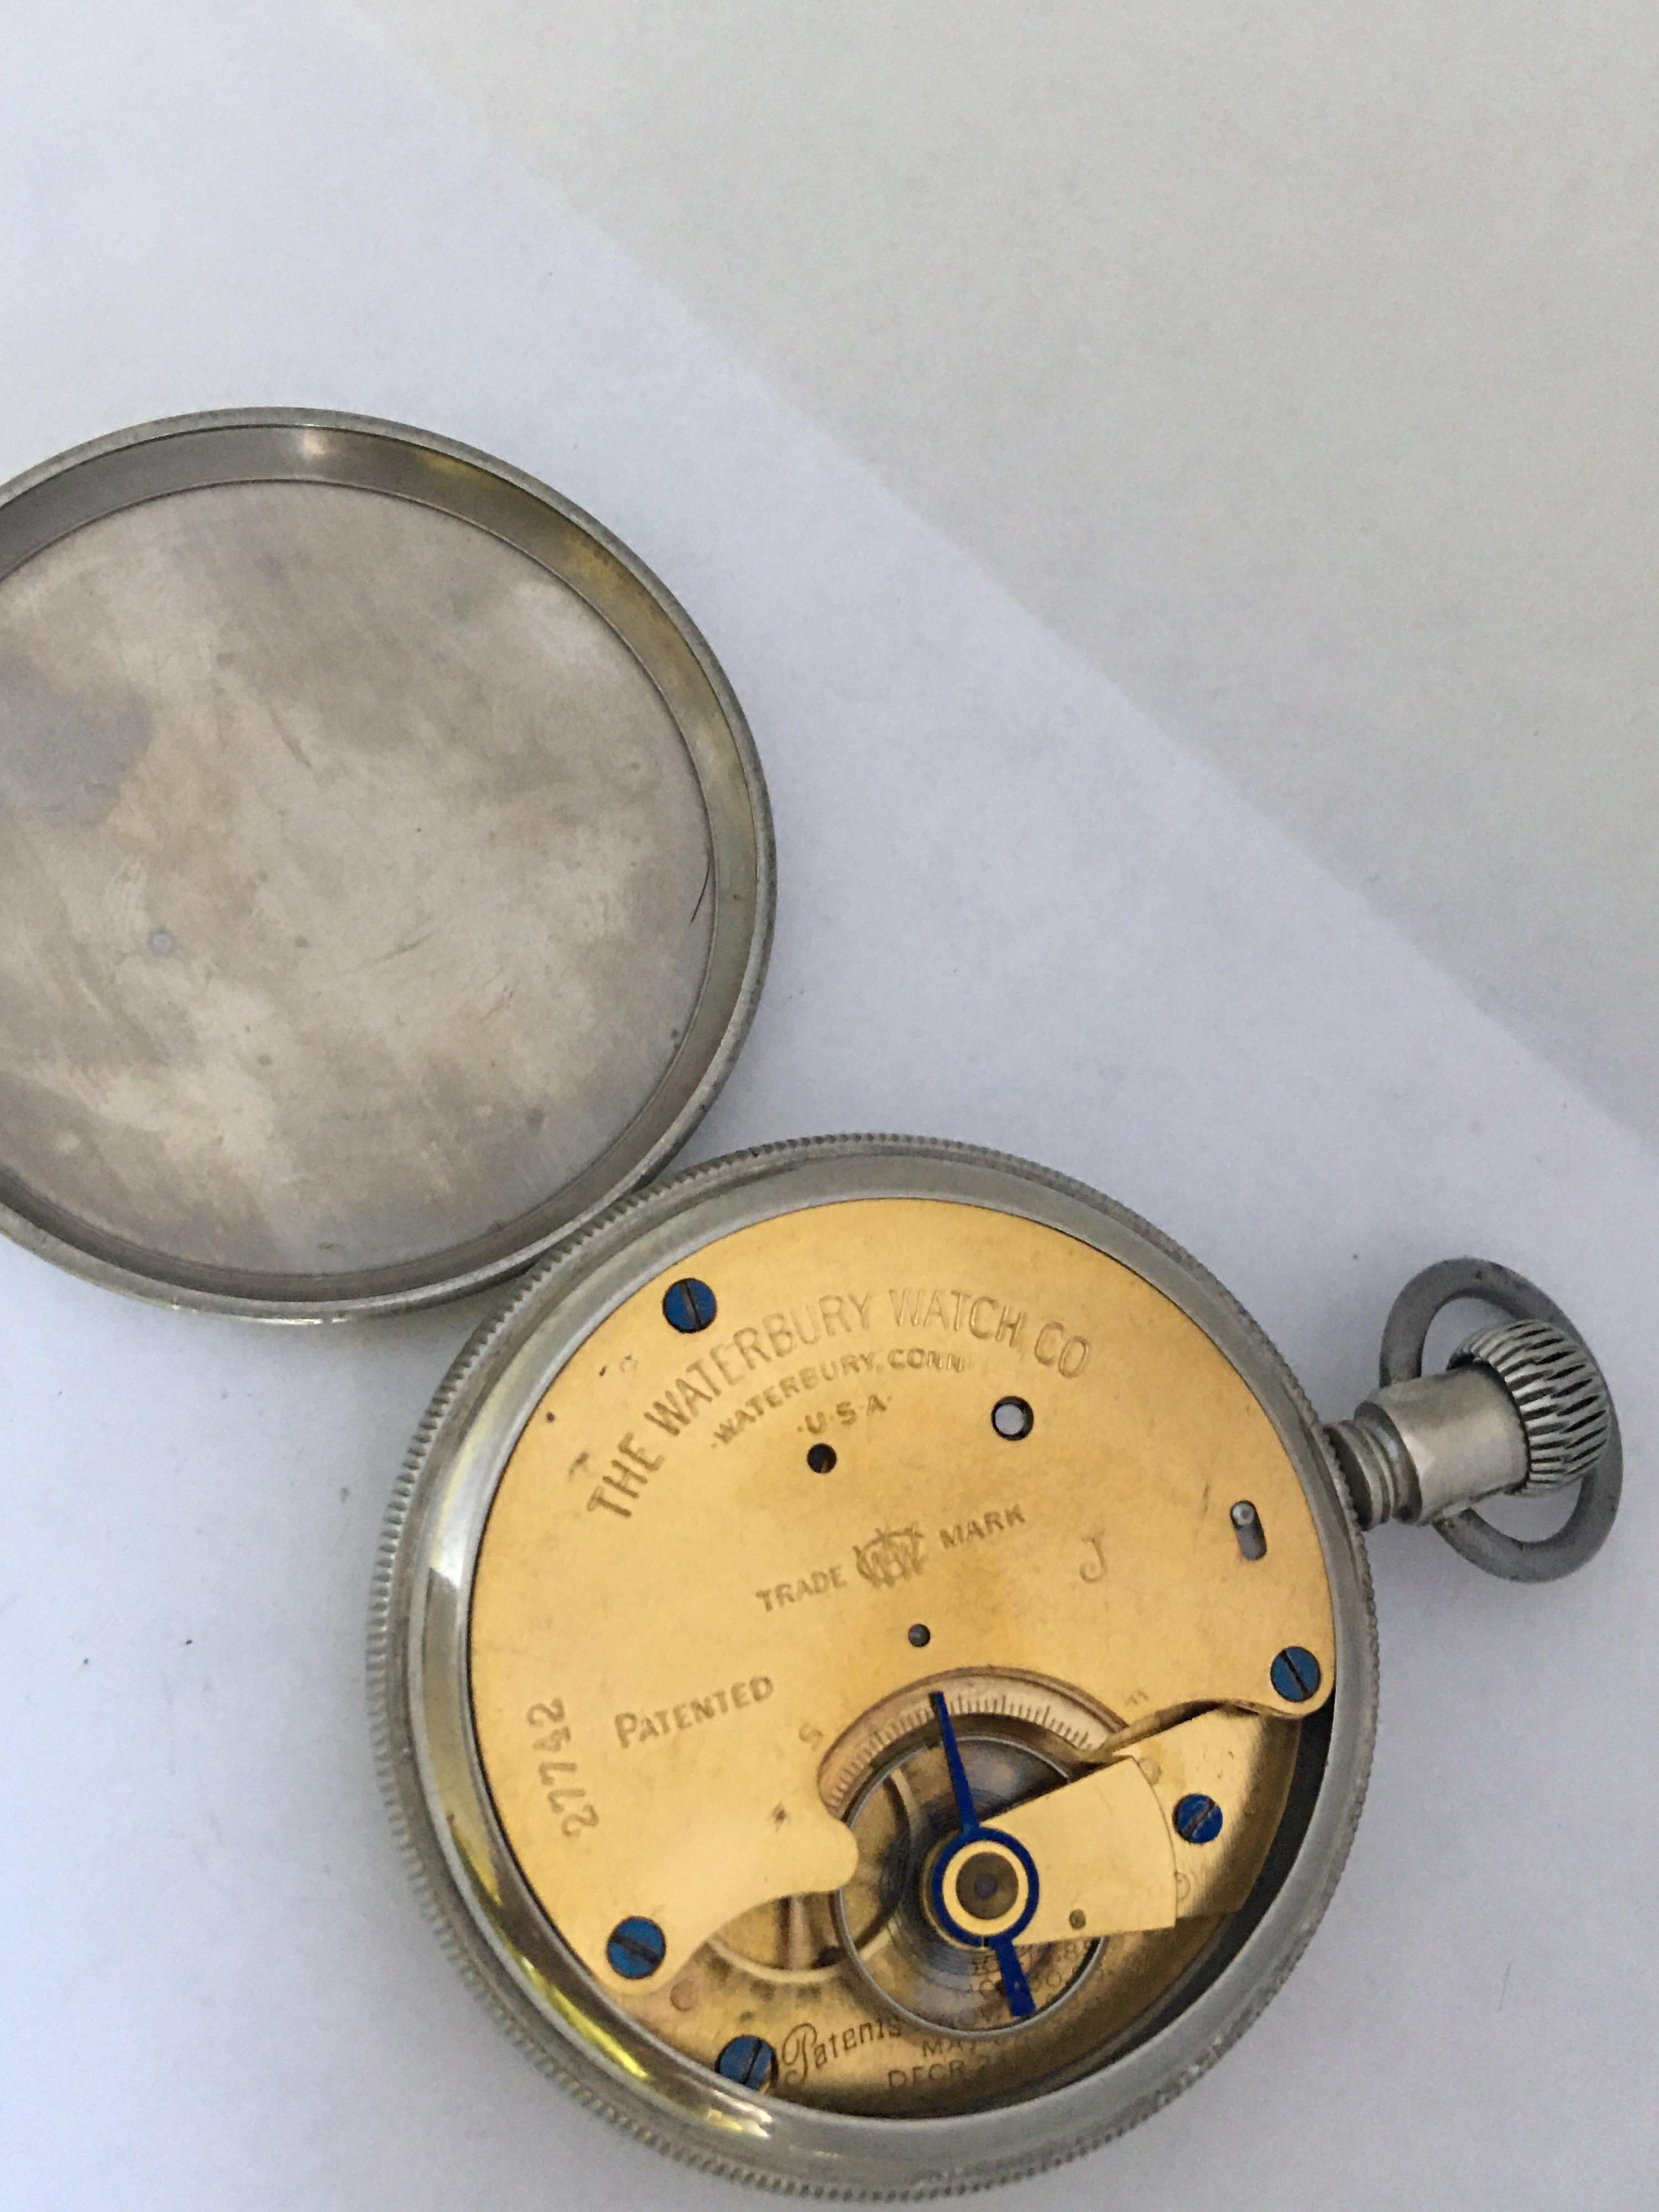 Antique Waterbury & Watch Co. Hand-Winding Pocket Watch For Sale 4